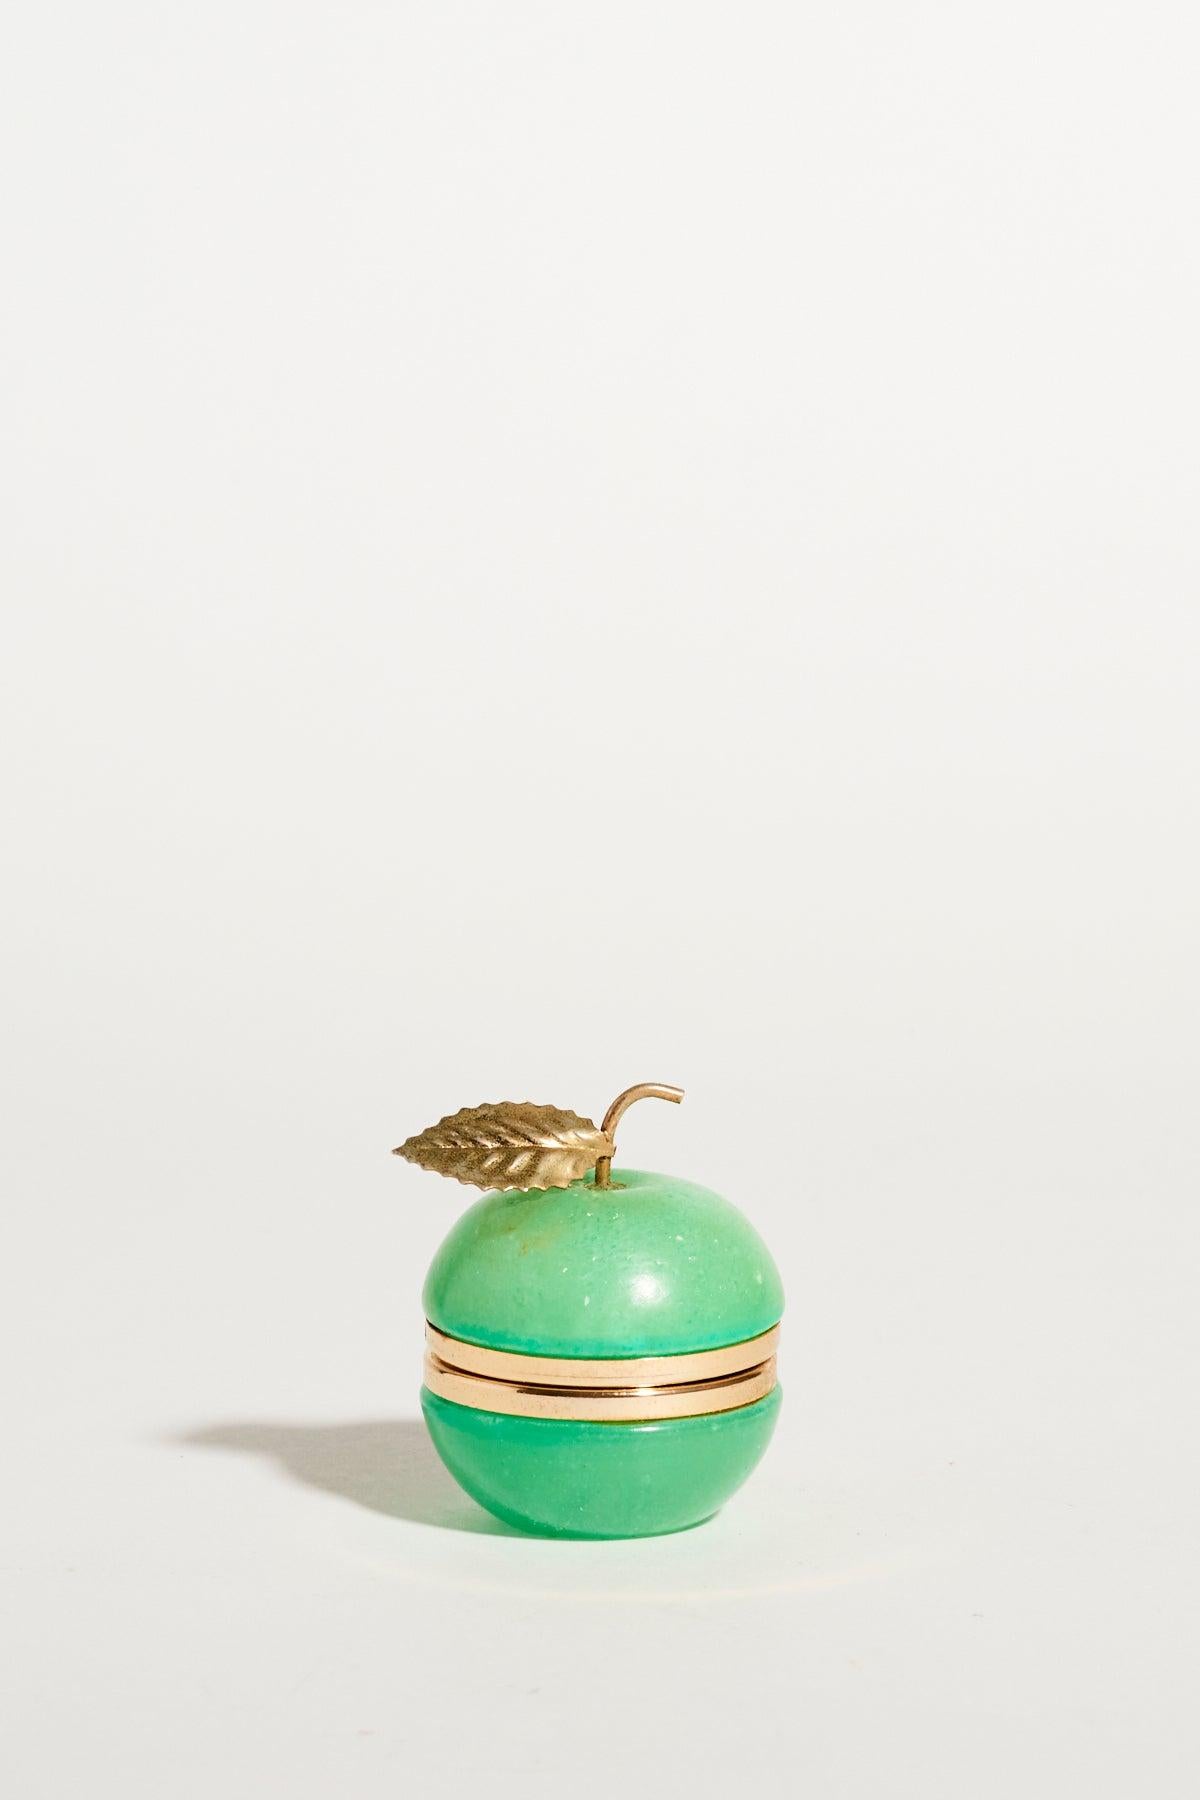 Cute green apple alabaster ring dish. Perfect little companion for your favorite rings.